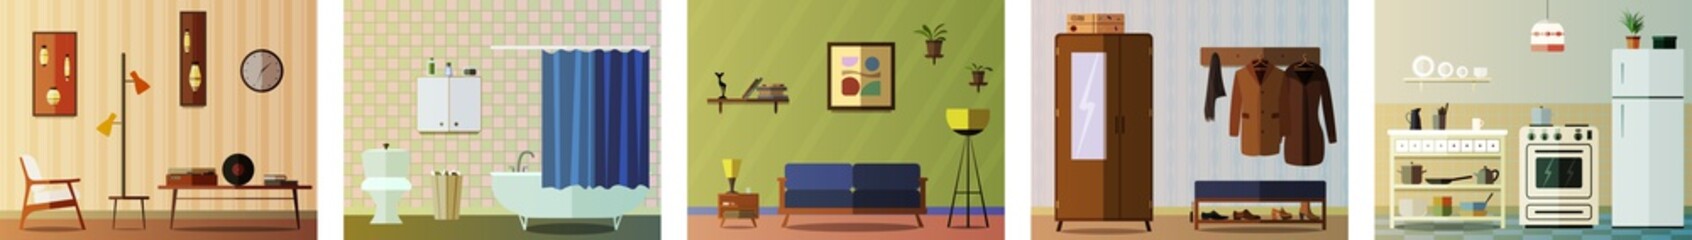 House interior in vector. Kitchen, living room, bedroom, bathroom. Made in one style, design template of retro style.